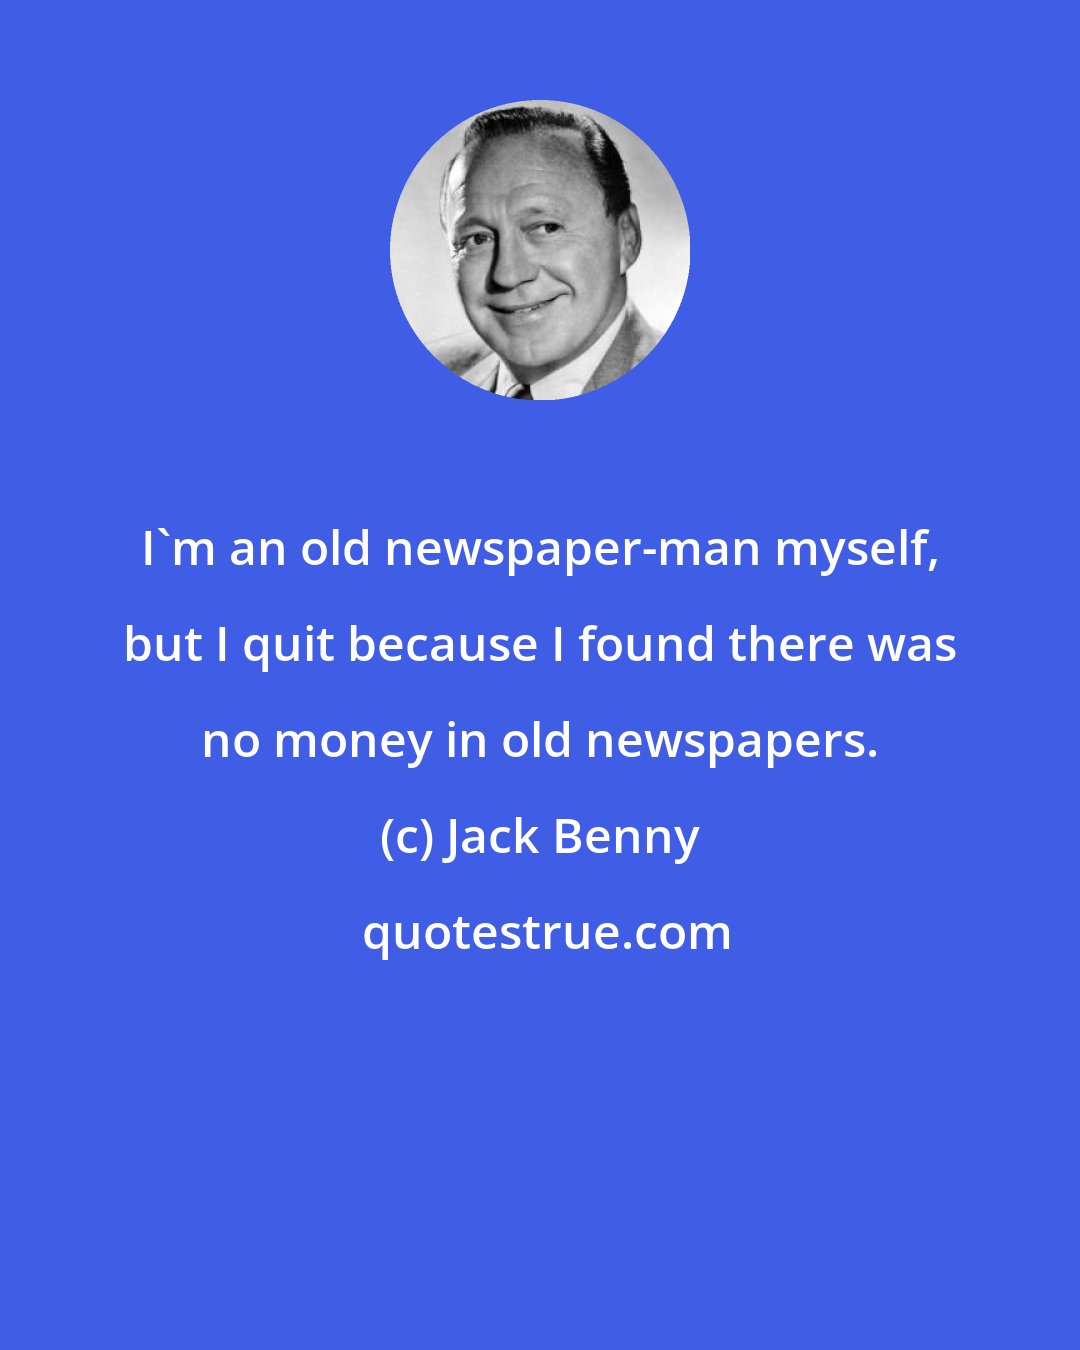 Jack Benny: I'm an old newspaper-man myself, but I quit because I found there was no money in old newspapers.